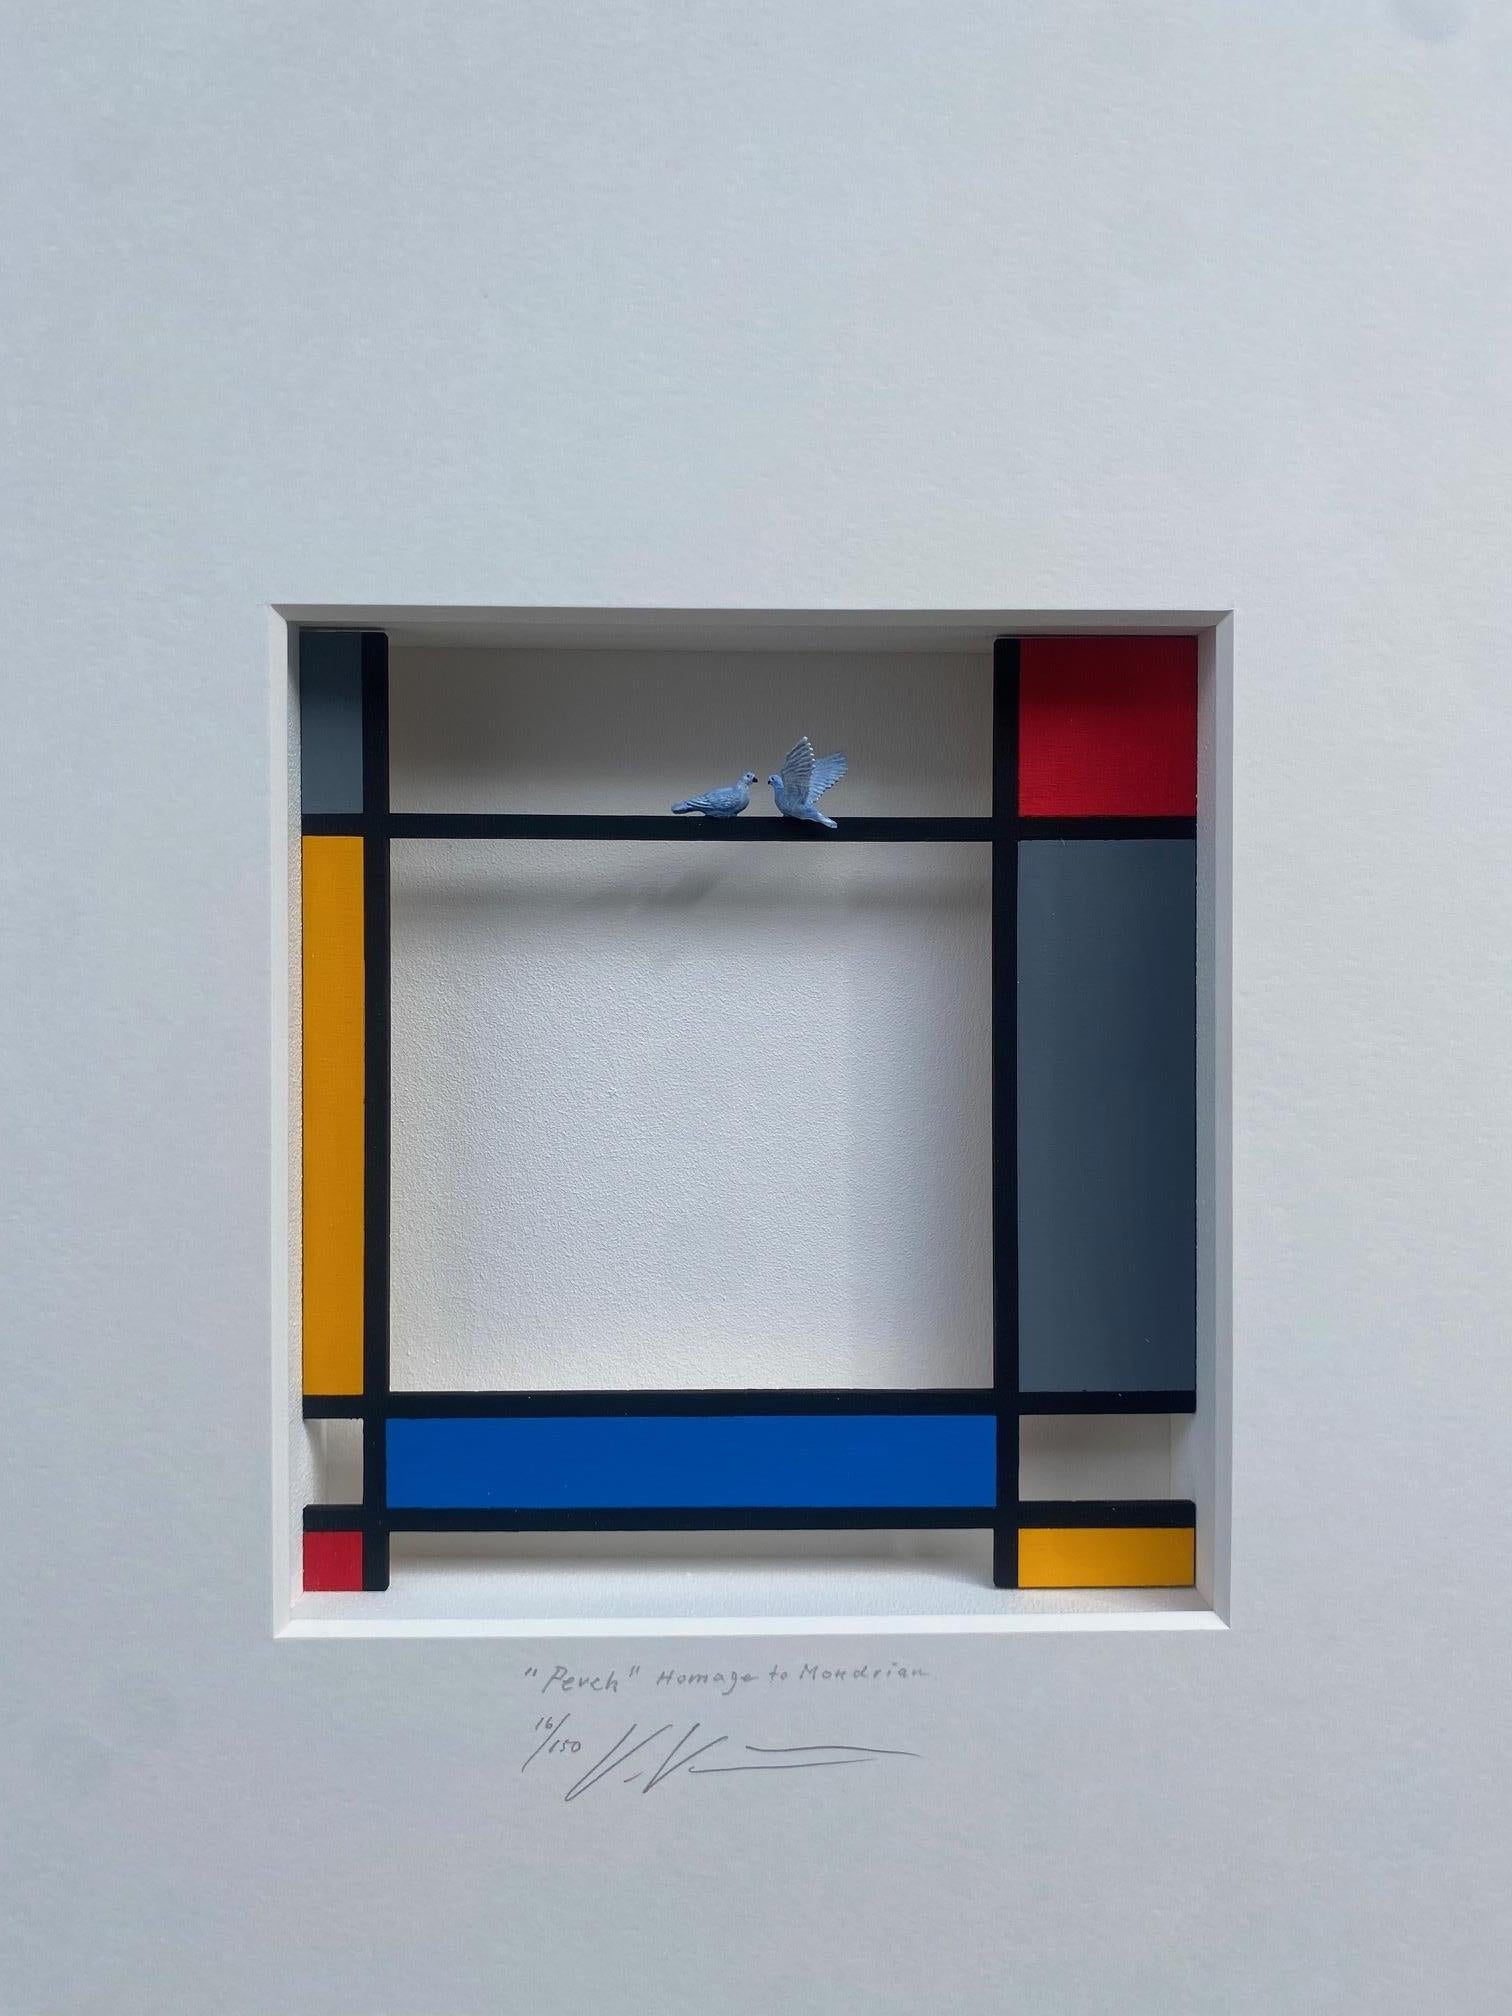 Homage to Mondrian - Perch - contemporary art work, design tribute Dutch master - Assemblage Mixed Media Art by Volker Kuhn